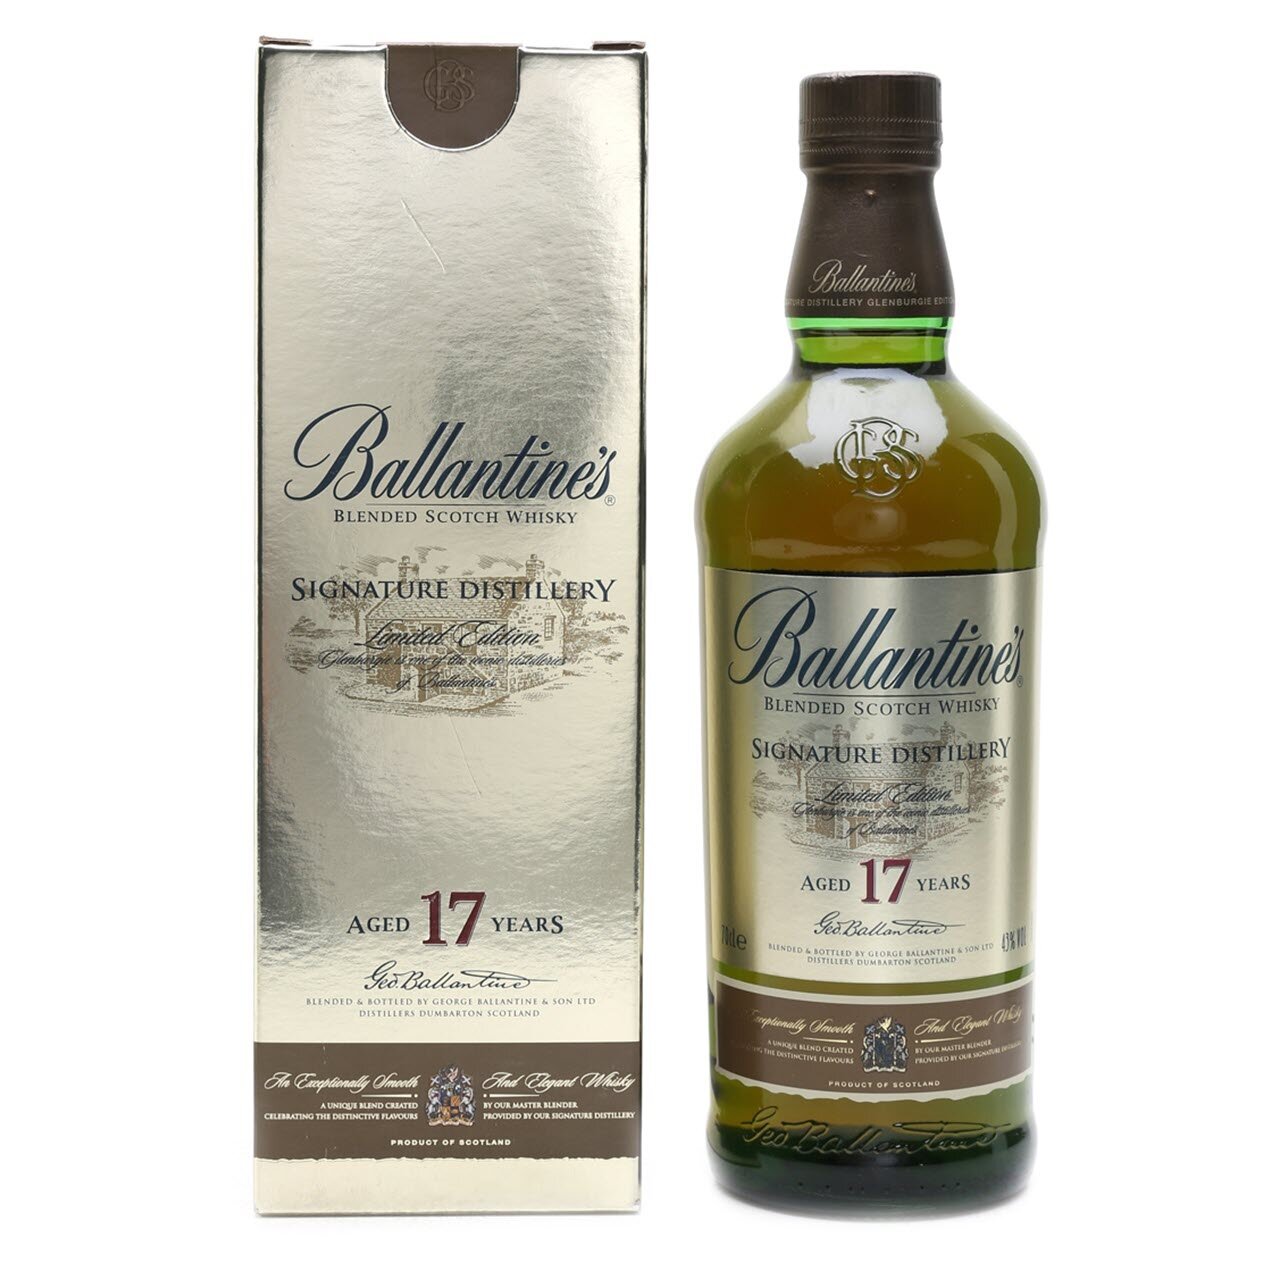 BALLANTINES 17 YEAR BLENDED SCOTCH WHISKY 750ML